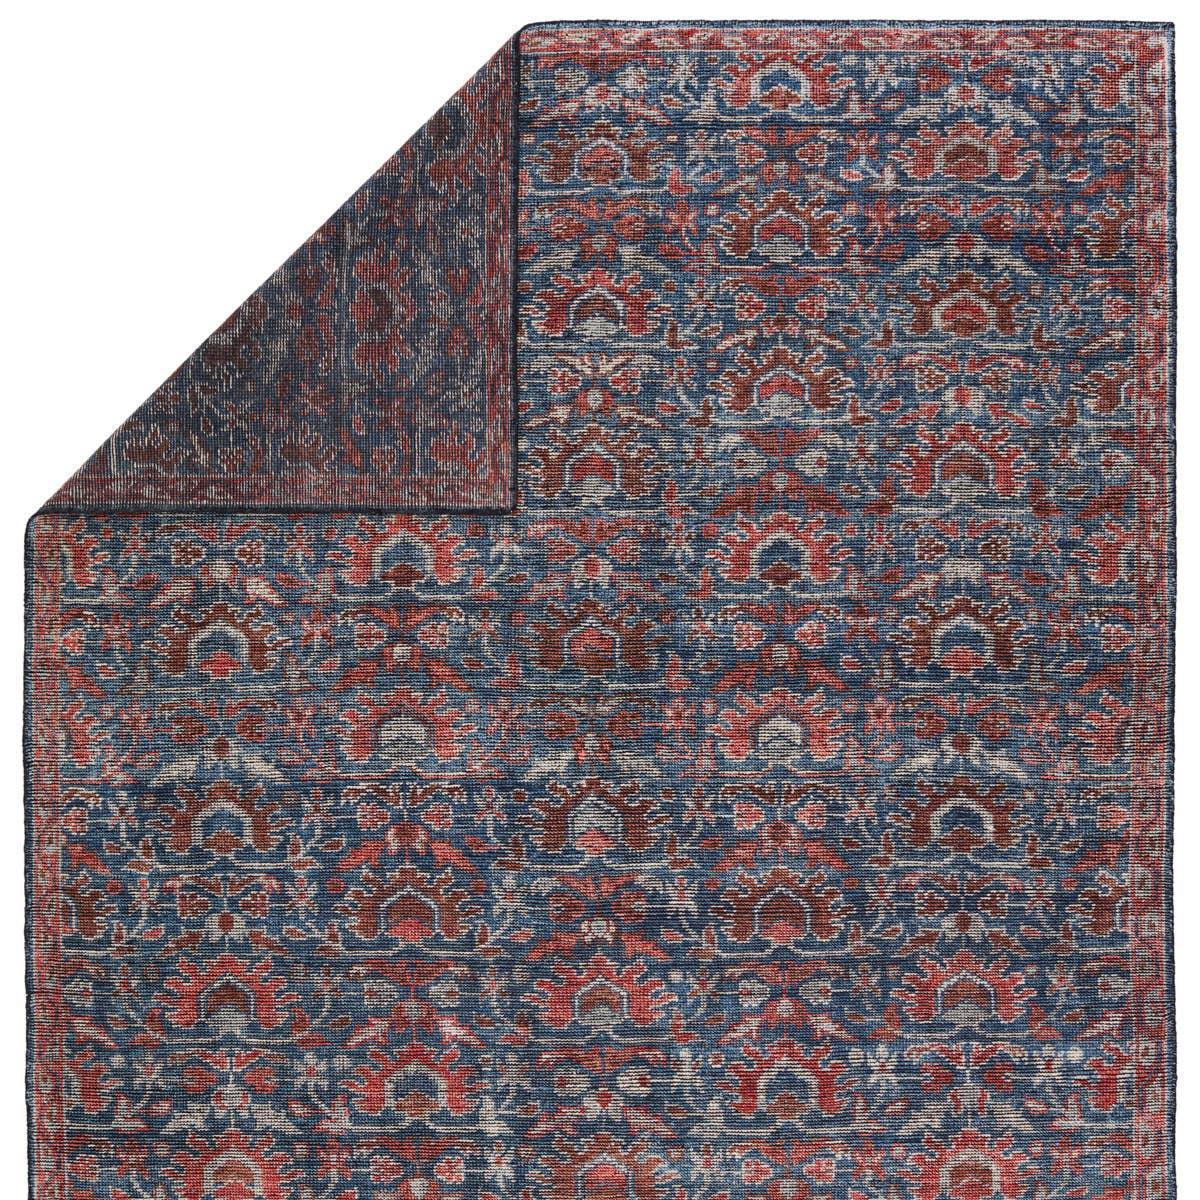 The Rhapsody Venetia features heirloom-quality designs of stunningly abrashed Old World patterns. The Venetia area rug showcases a subtly distressed floral medallion motif in rich, vibrant hues of red, blue, blush, and ivory. This durable wool handknot anchors living spaces with a fresh take on vintage style.Hand Knotted Amethyst Home provides interior design, new home construction design consulting, vintage area rugs, and lighting in the Des Moines metro area.